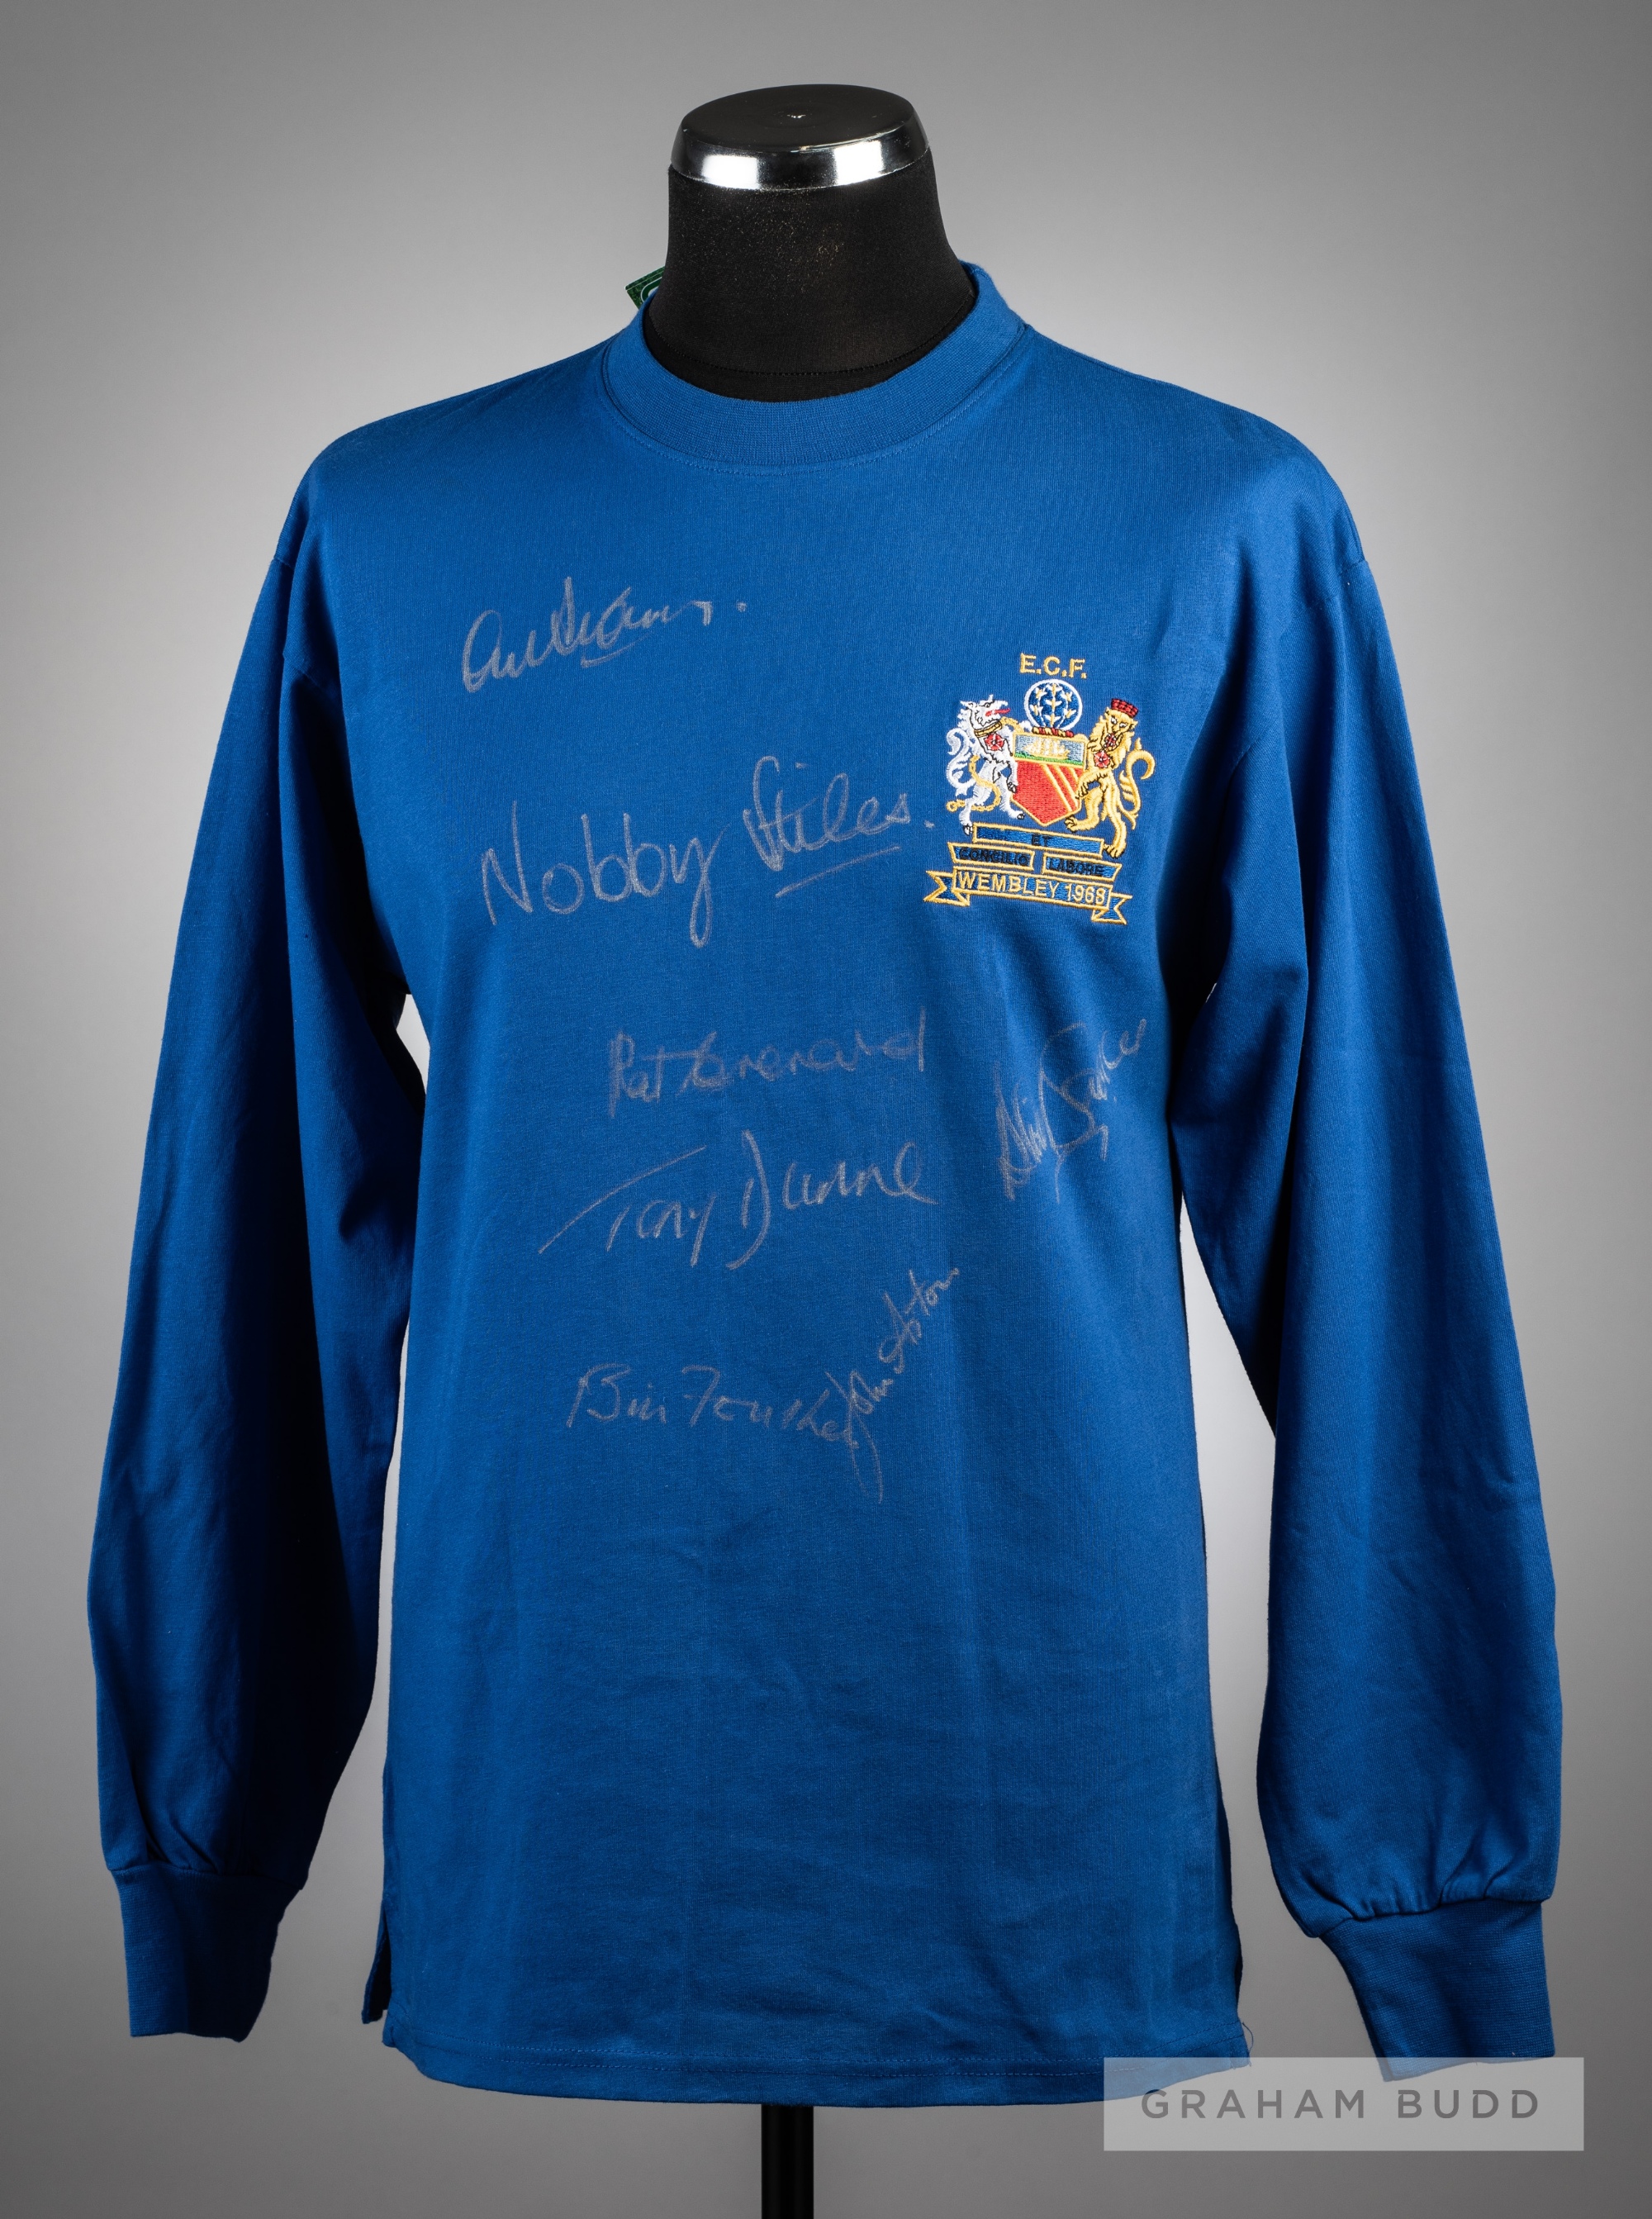 Manchester United Legends signed blue Wembley 1968 retro jersey,  long-sleeved, with embroidered